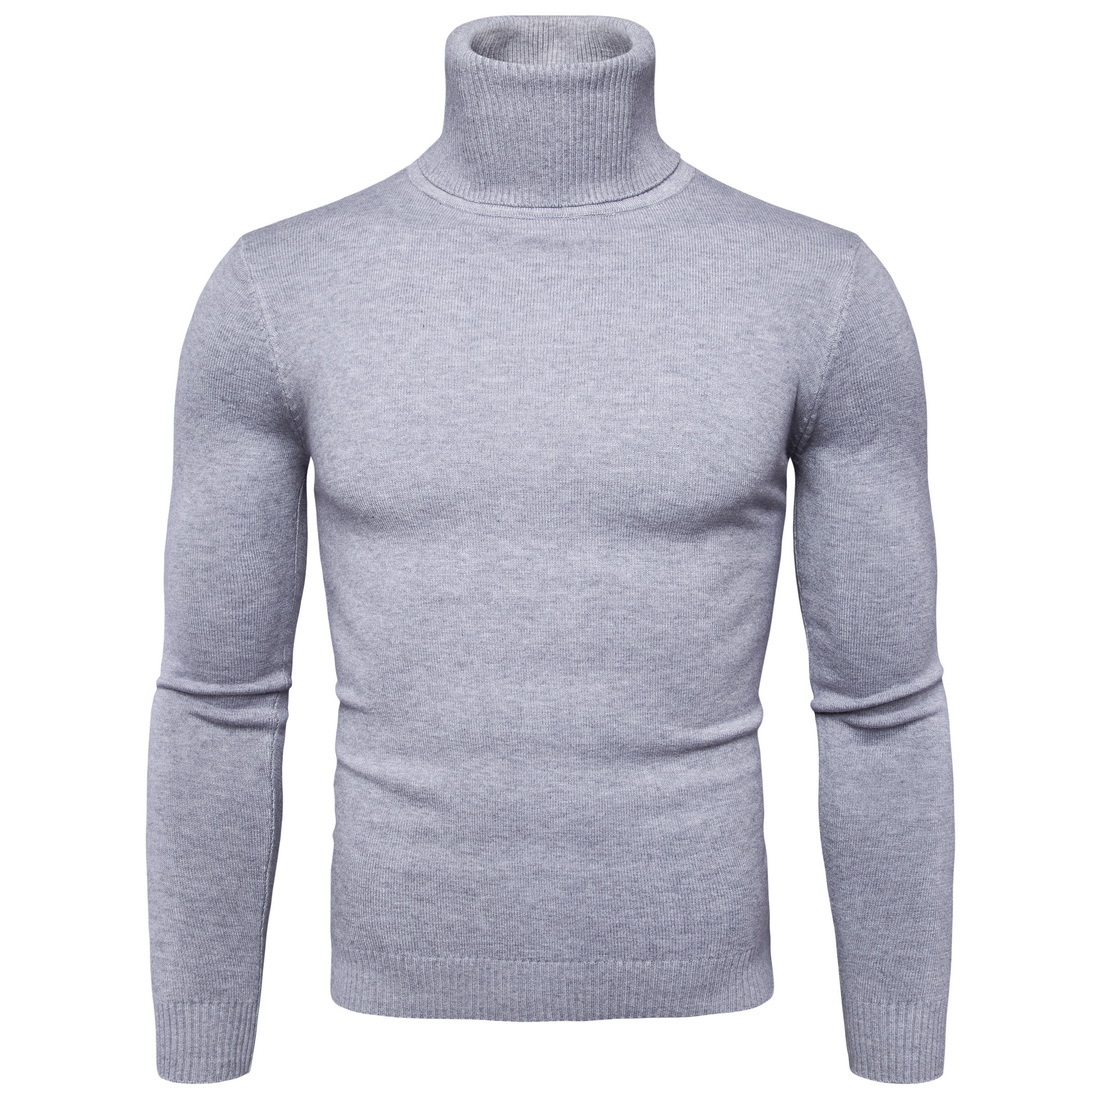 Men Knitted Sweater Autumn Winter Turtleneck Long Sleeve Casual Slim Pullover Tops light gray